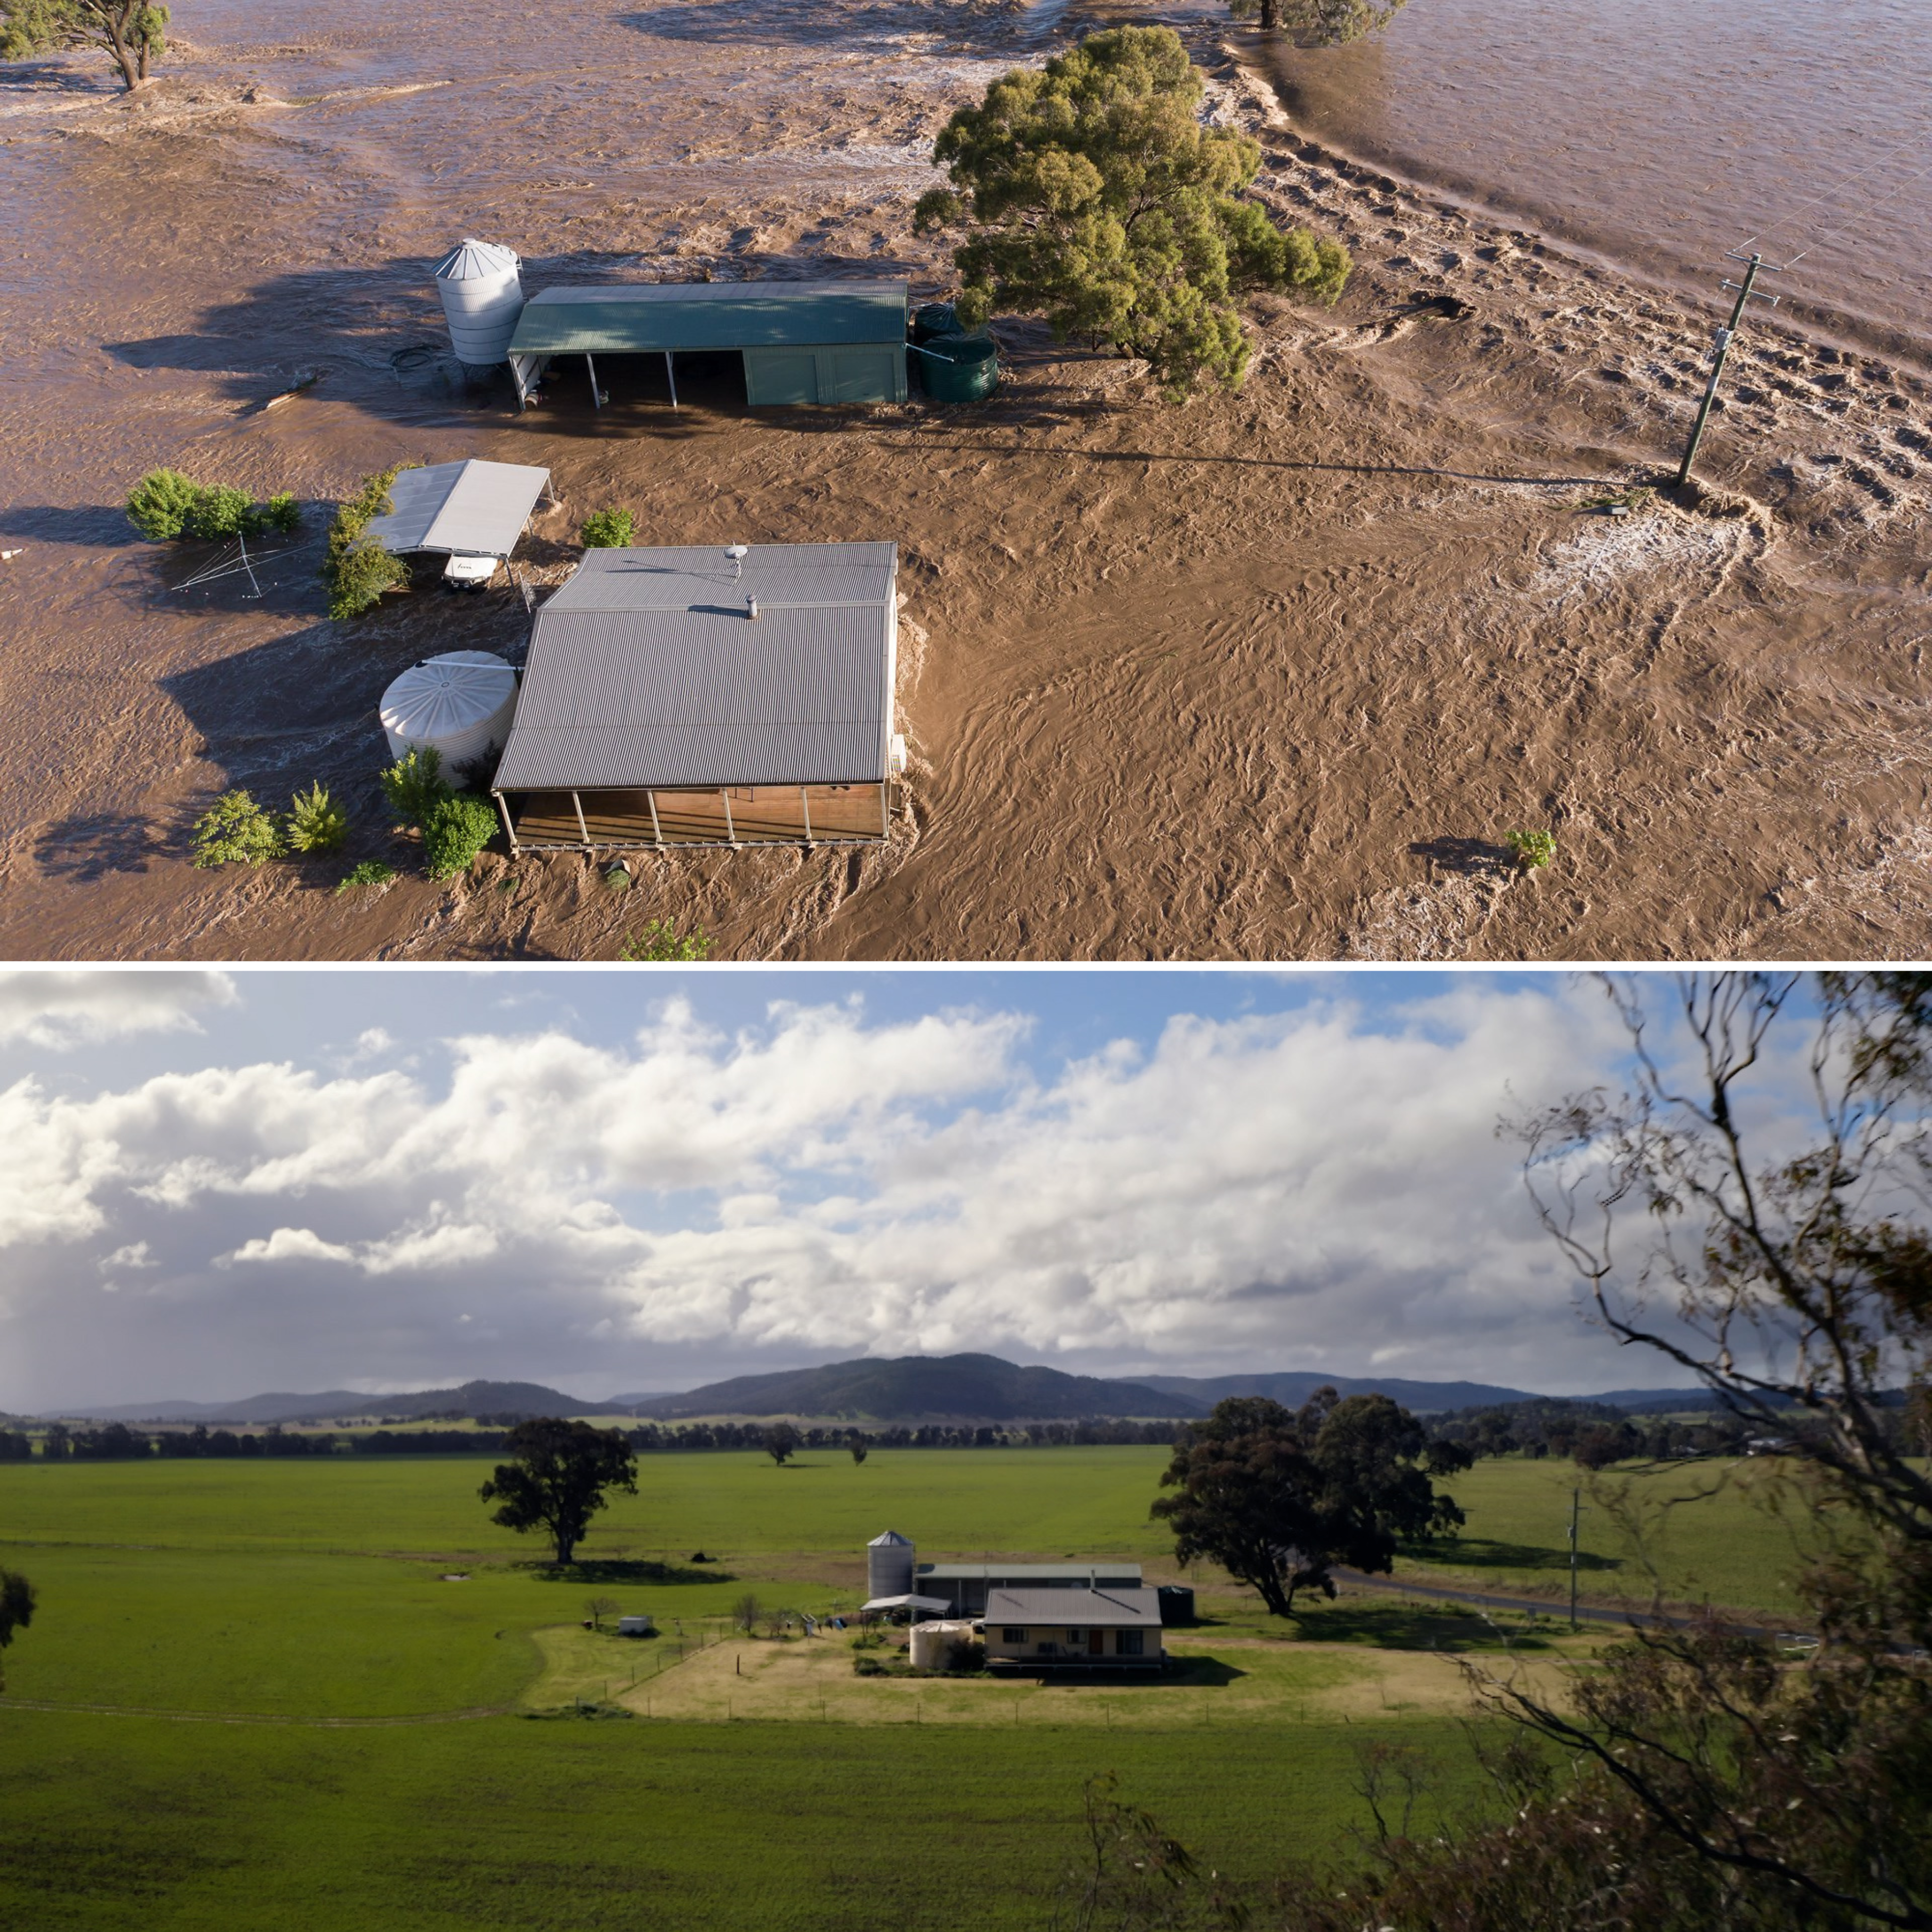 A composite image of a house engulfed by floodwaters on the top and now, after the recovery, on the bottom